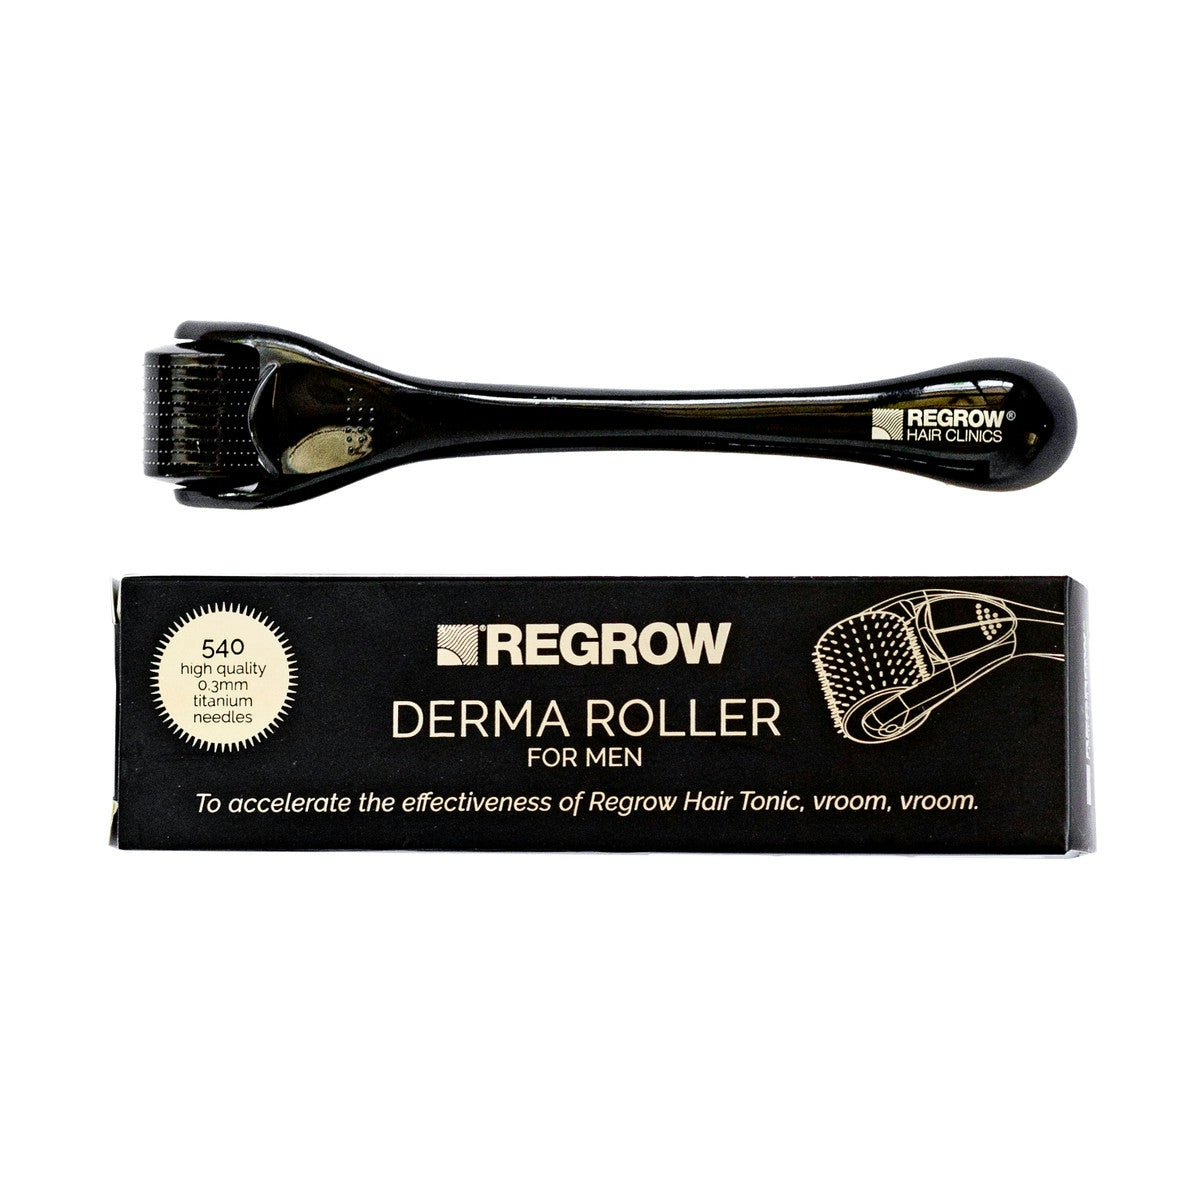 image of Regrow Hair Clinics Derma Roller For Men on white background 